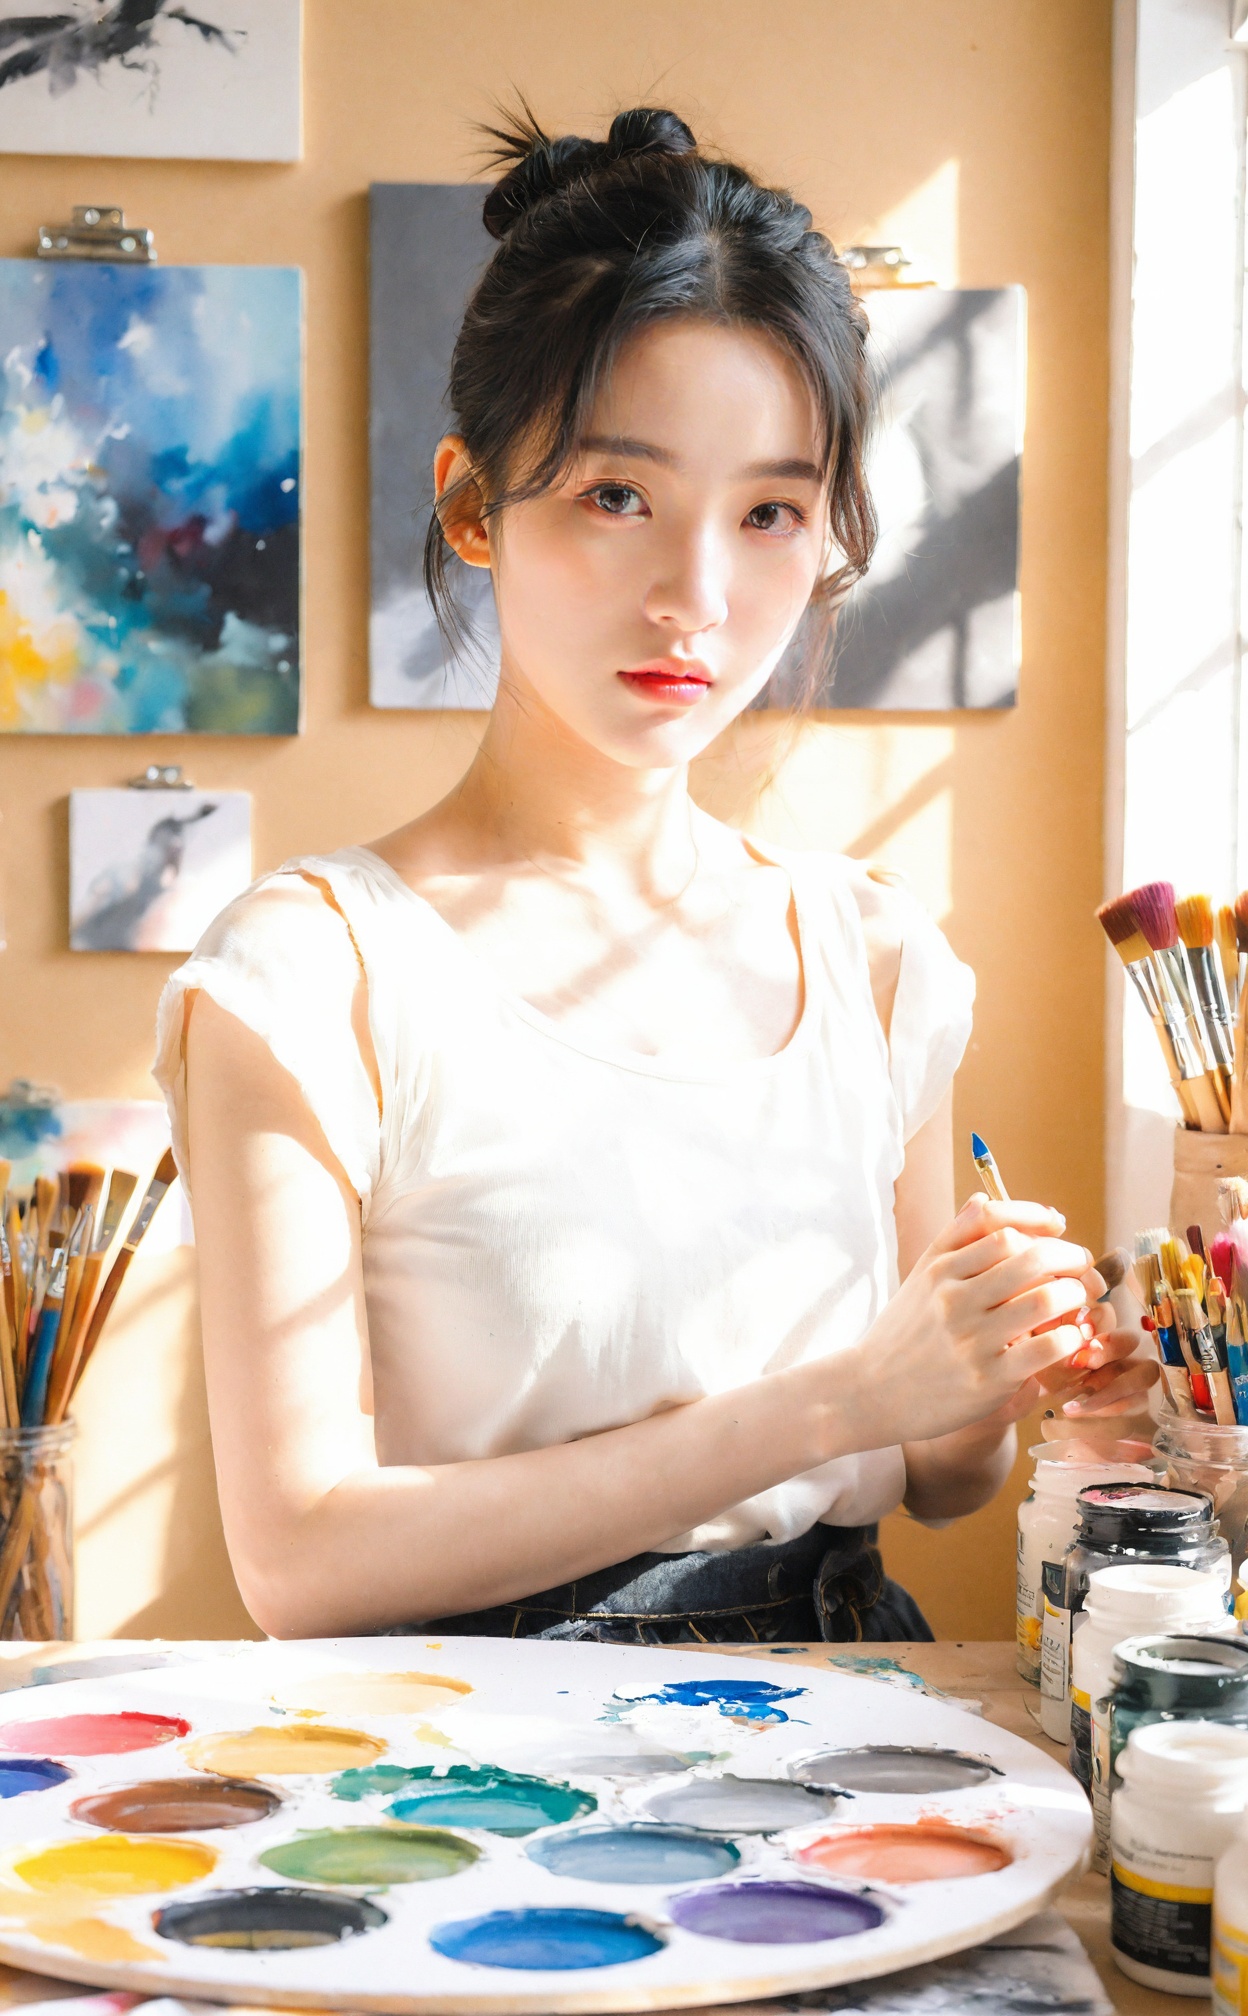 mugglelight, a portrait of a painter in a sunlit studio, surrounded by art supplies and canvases, natural light, creative ambiance, focused expression, artistic environment.korean girl,black hair,